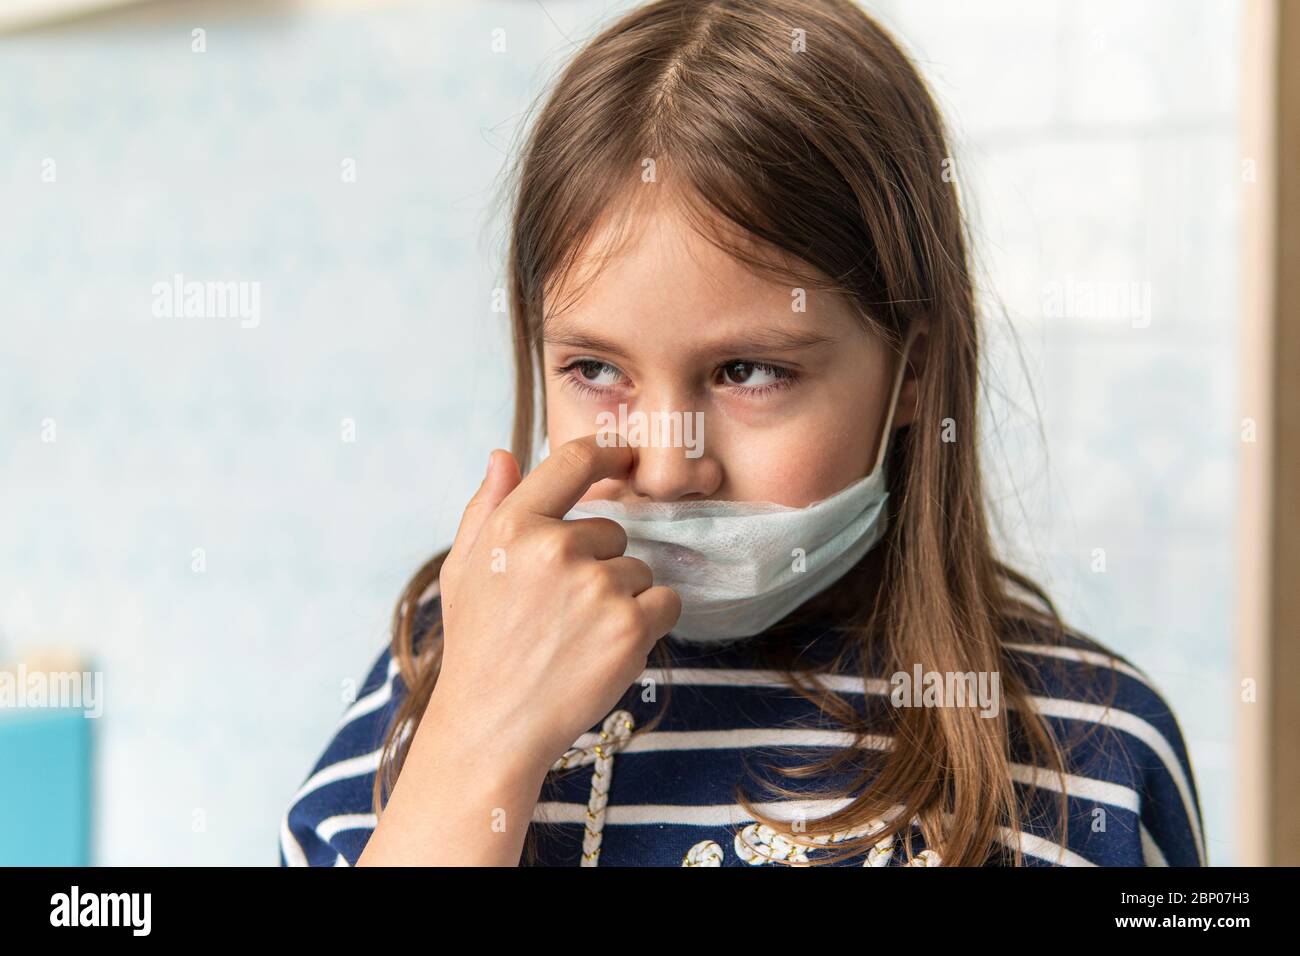 Toddler girl with medical mask on face. Covid19 corona virus outbreak. girl touches face dirty hands, it's not safe. Sad girl is tired of sitting at h Stock Photo